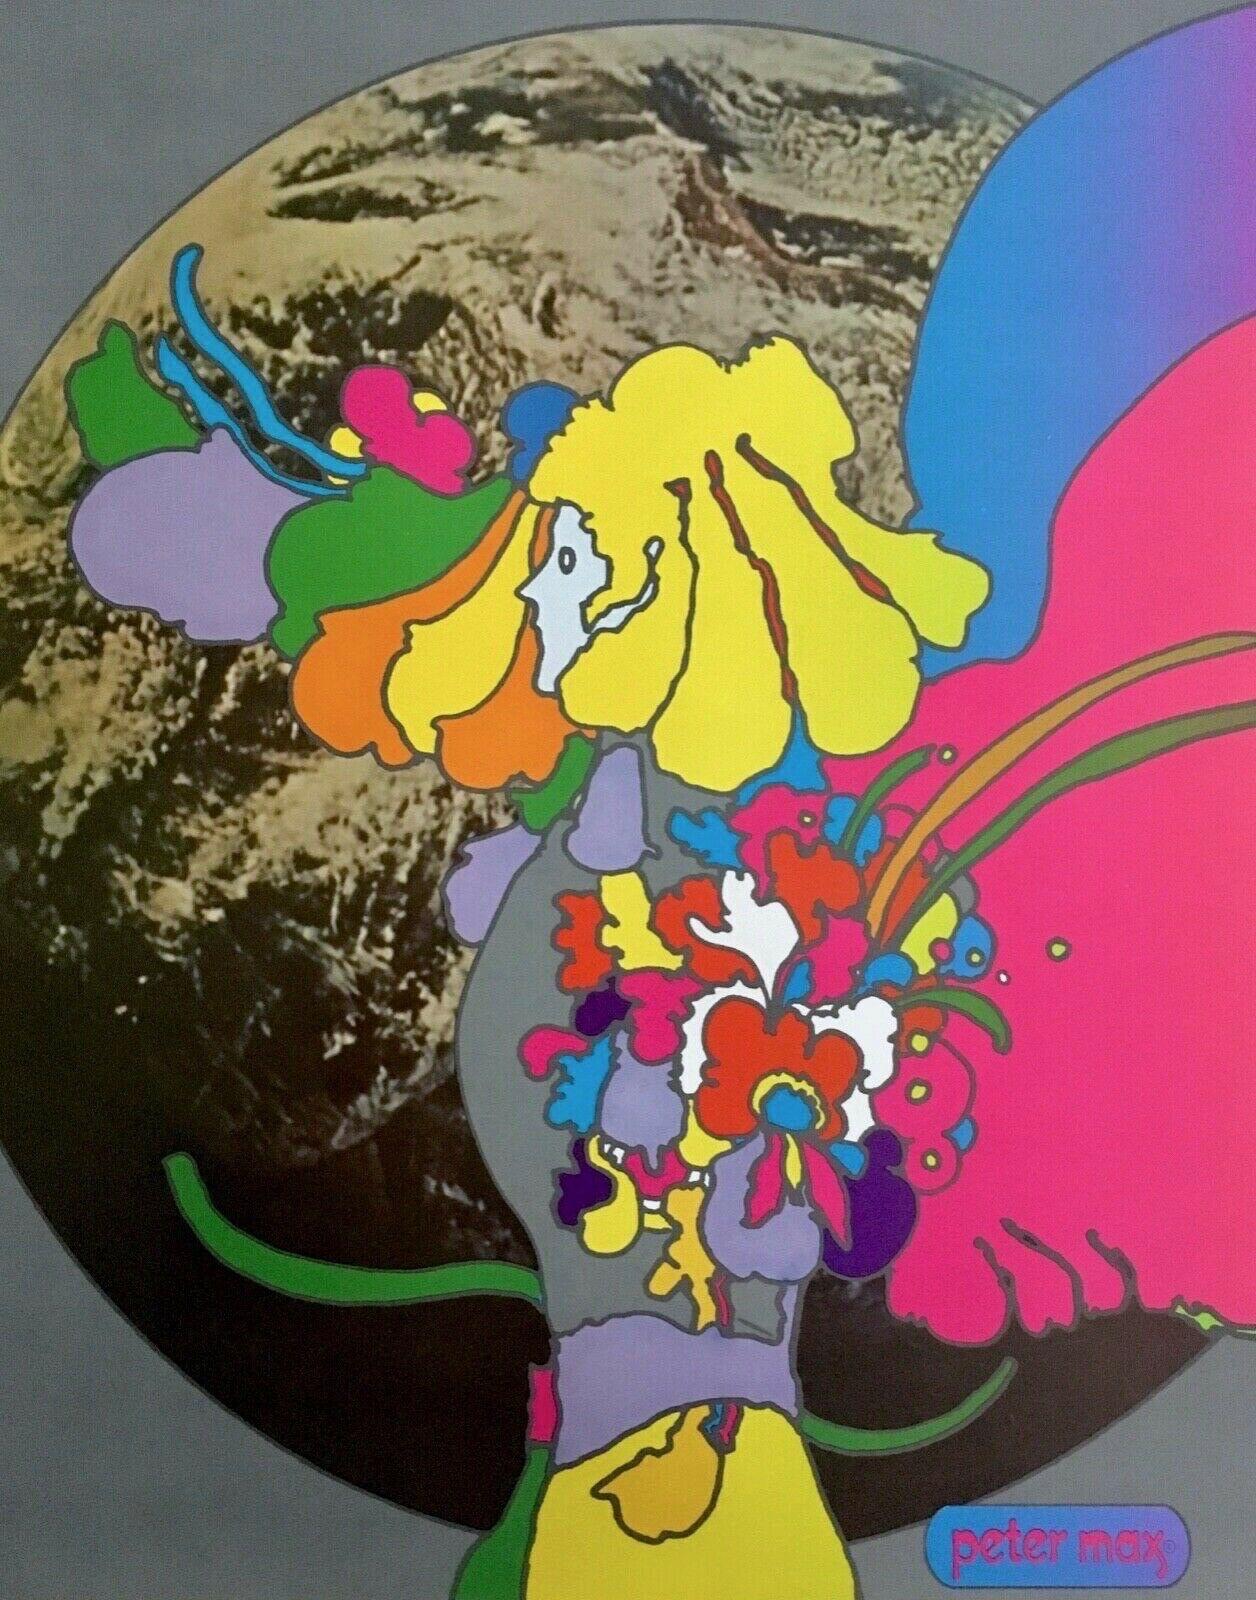 Moon Landing, Signed Original 1969 Vintage Offset Lithograph Psychedelic  - Print by Peter Max